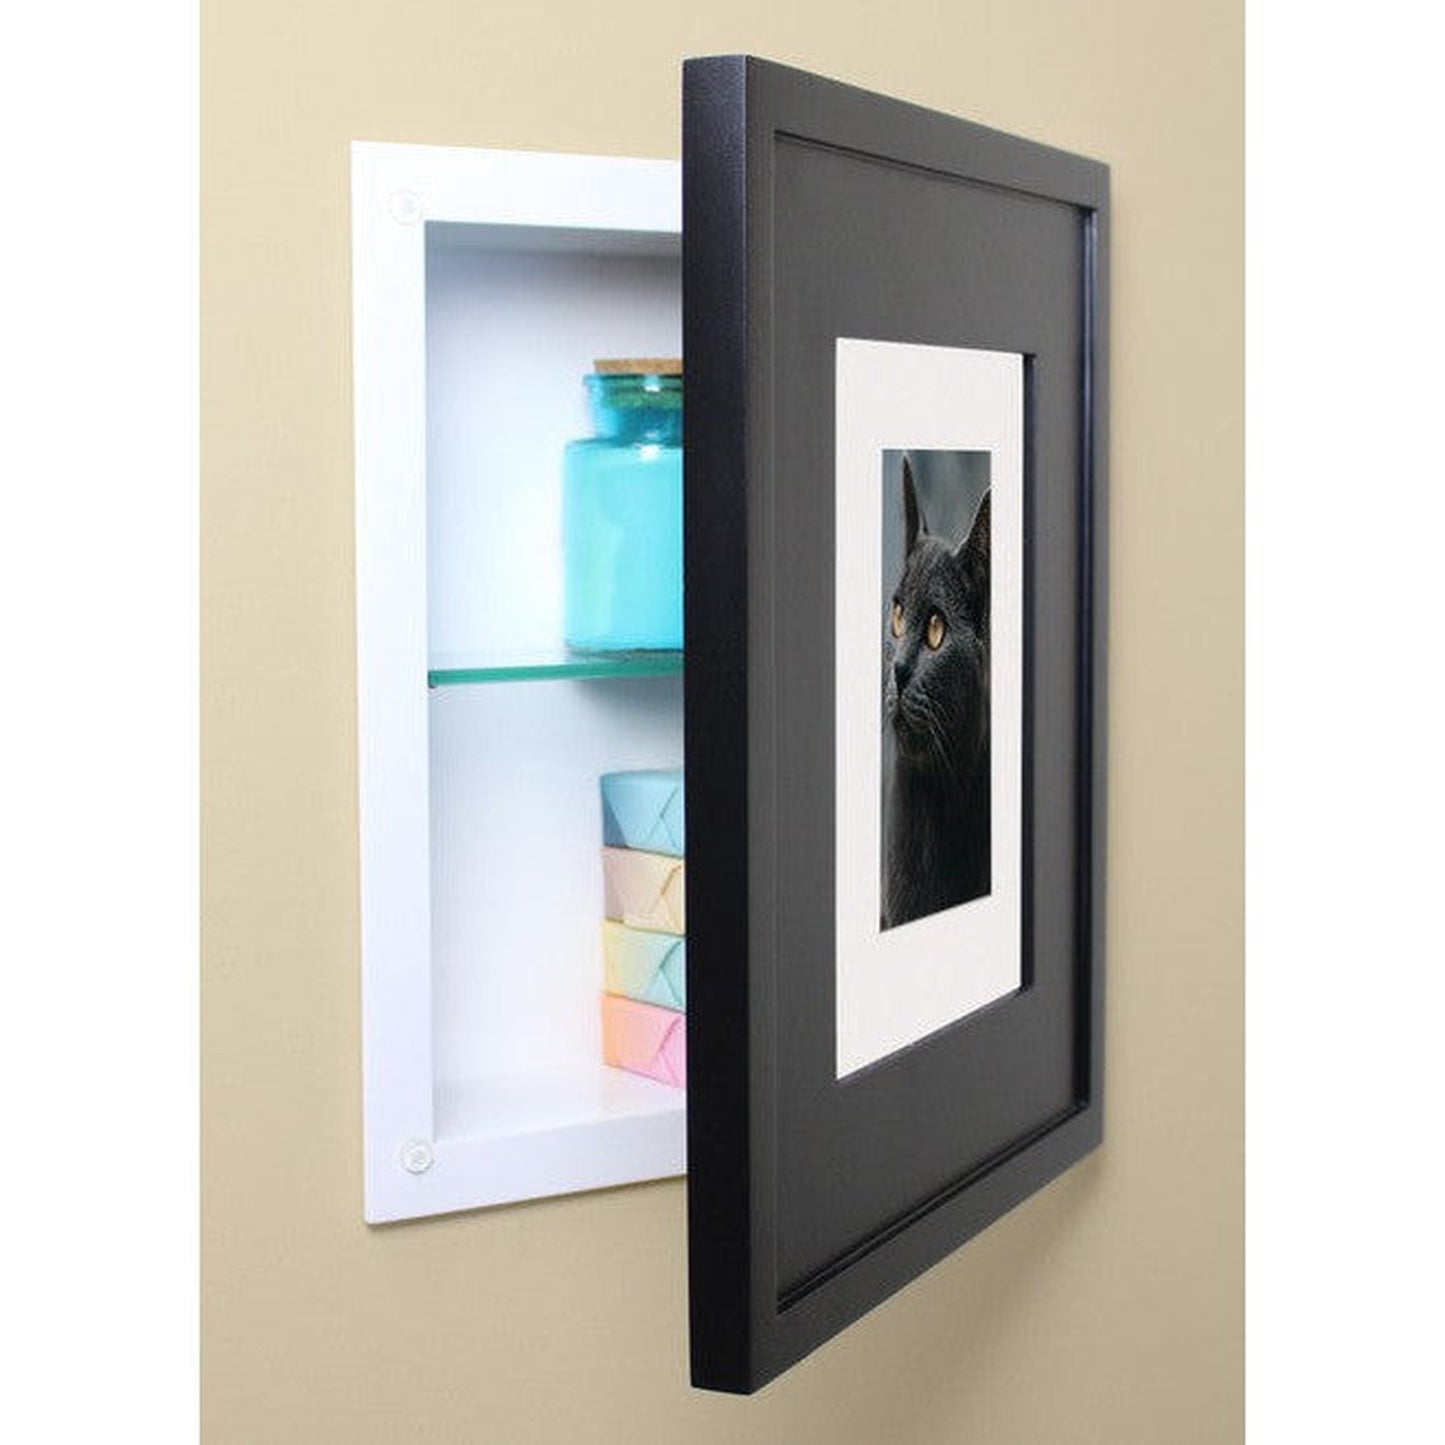 Fox Hollow Furnishings 11" x 14" Black Compact Portrait Standard 4" Depth Recessed Picture Frame Medicine Cabinet